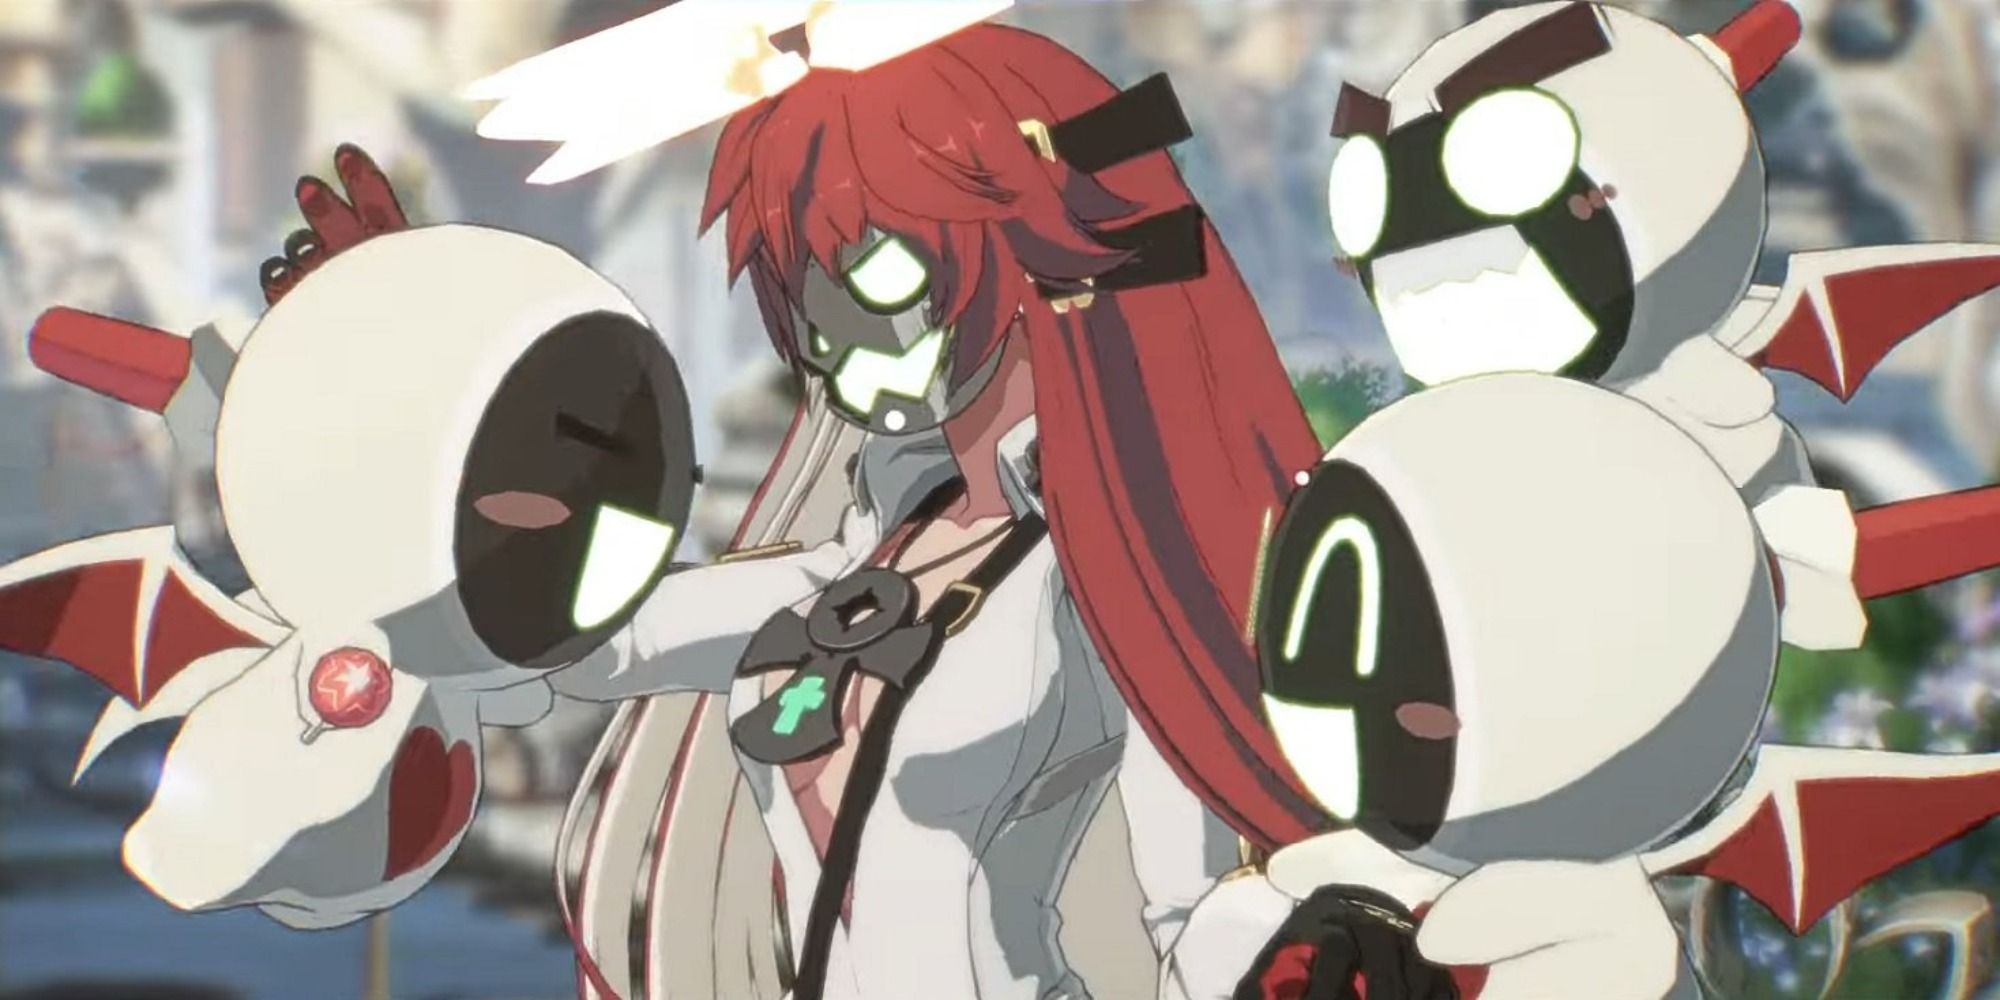 Jack-O' plays with her robot minions in Guilty Gear Strive